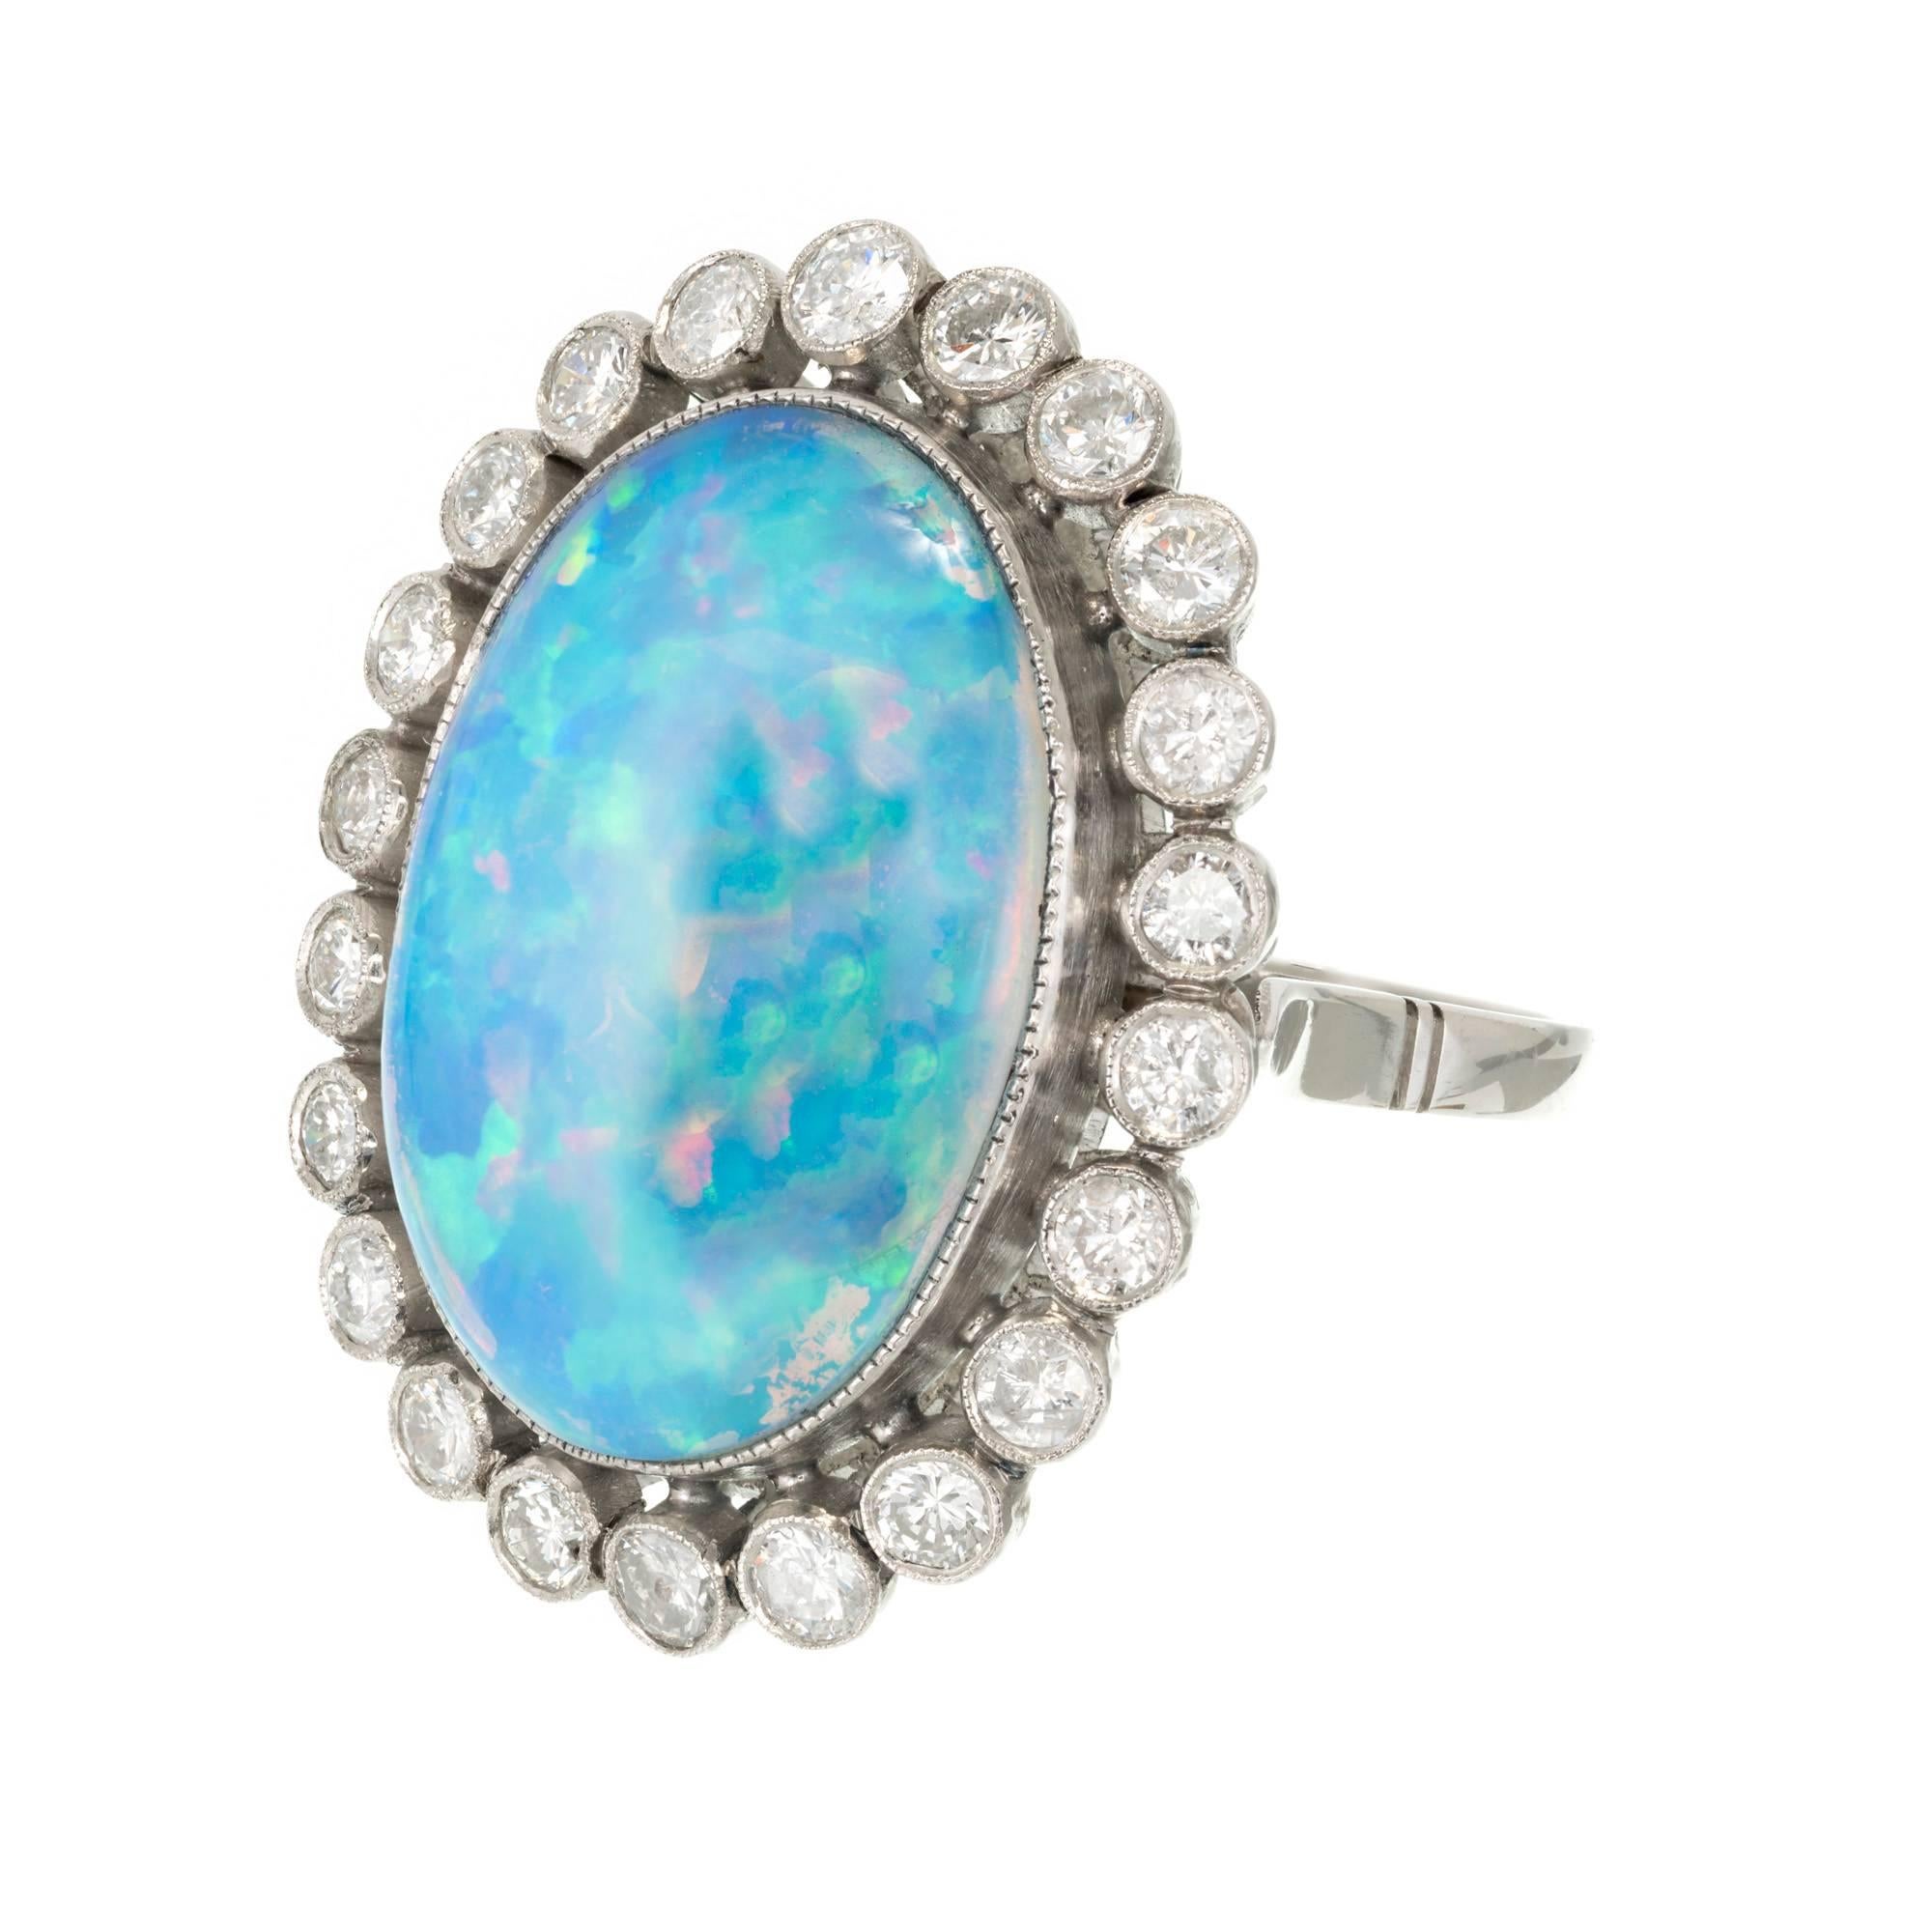 Mid-century Opal ring in handmade Platinum surrounded by bright white shiny transitional cut Diamonds in a halo. Bright blue with distinct red and green flash. 

1 oval cabochon blue with red, orange and green flash Opal, approx. total weight